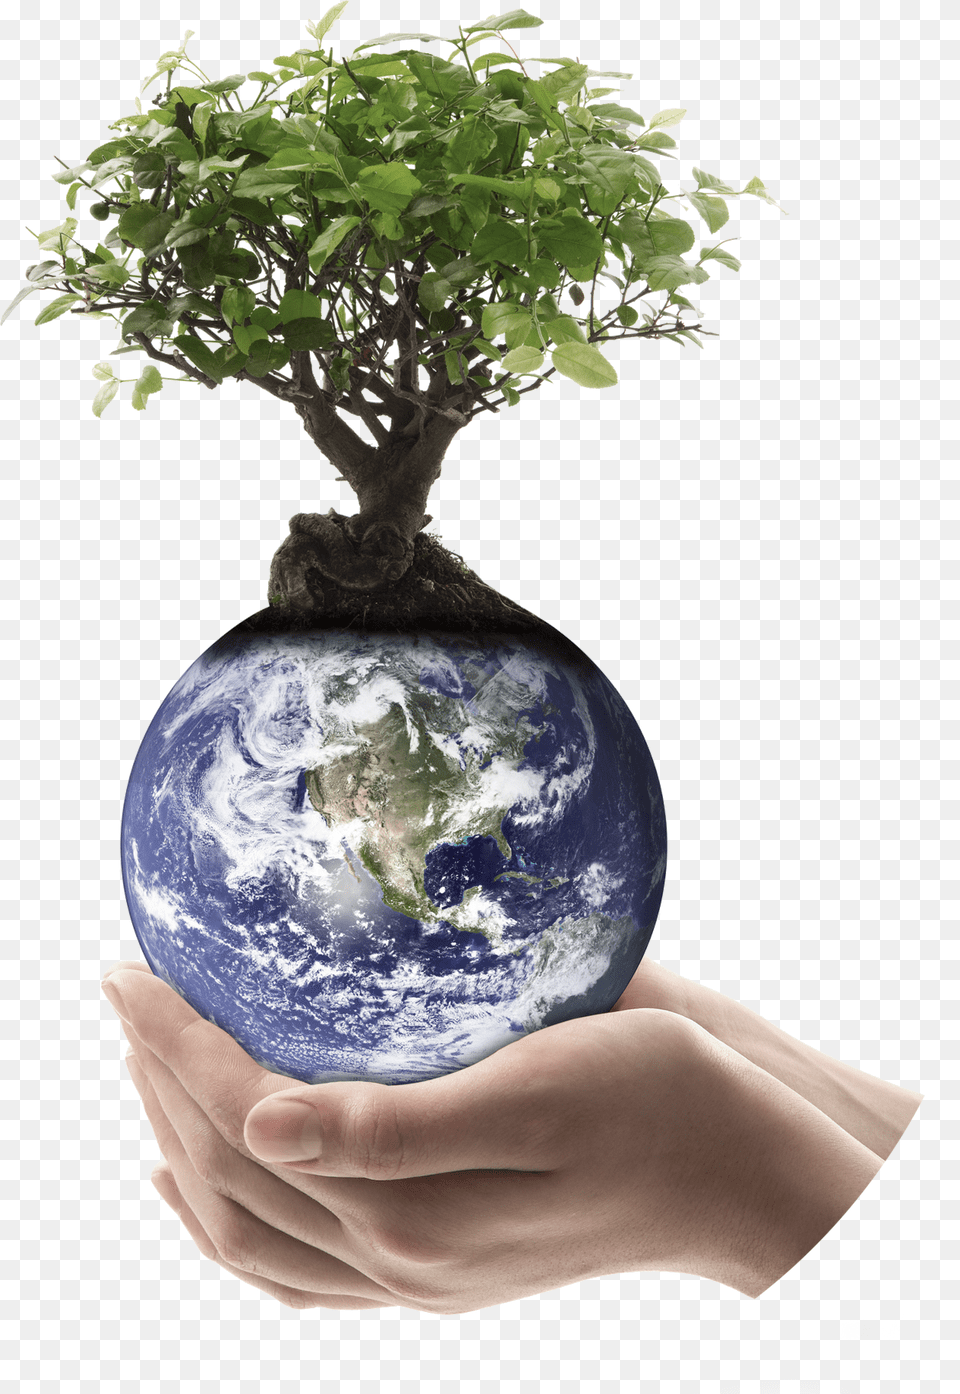 Trees Used For Making Paper, Plant, Potted Plant, Tree, Astronomy Png